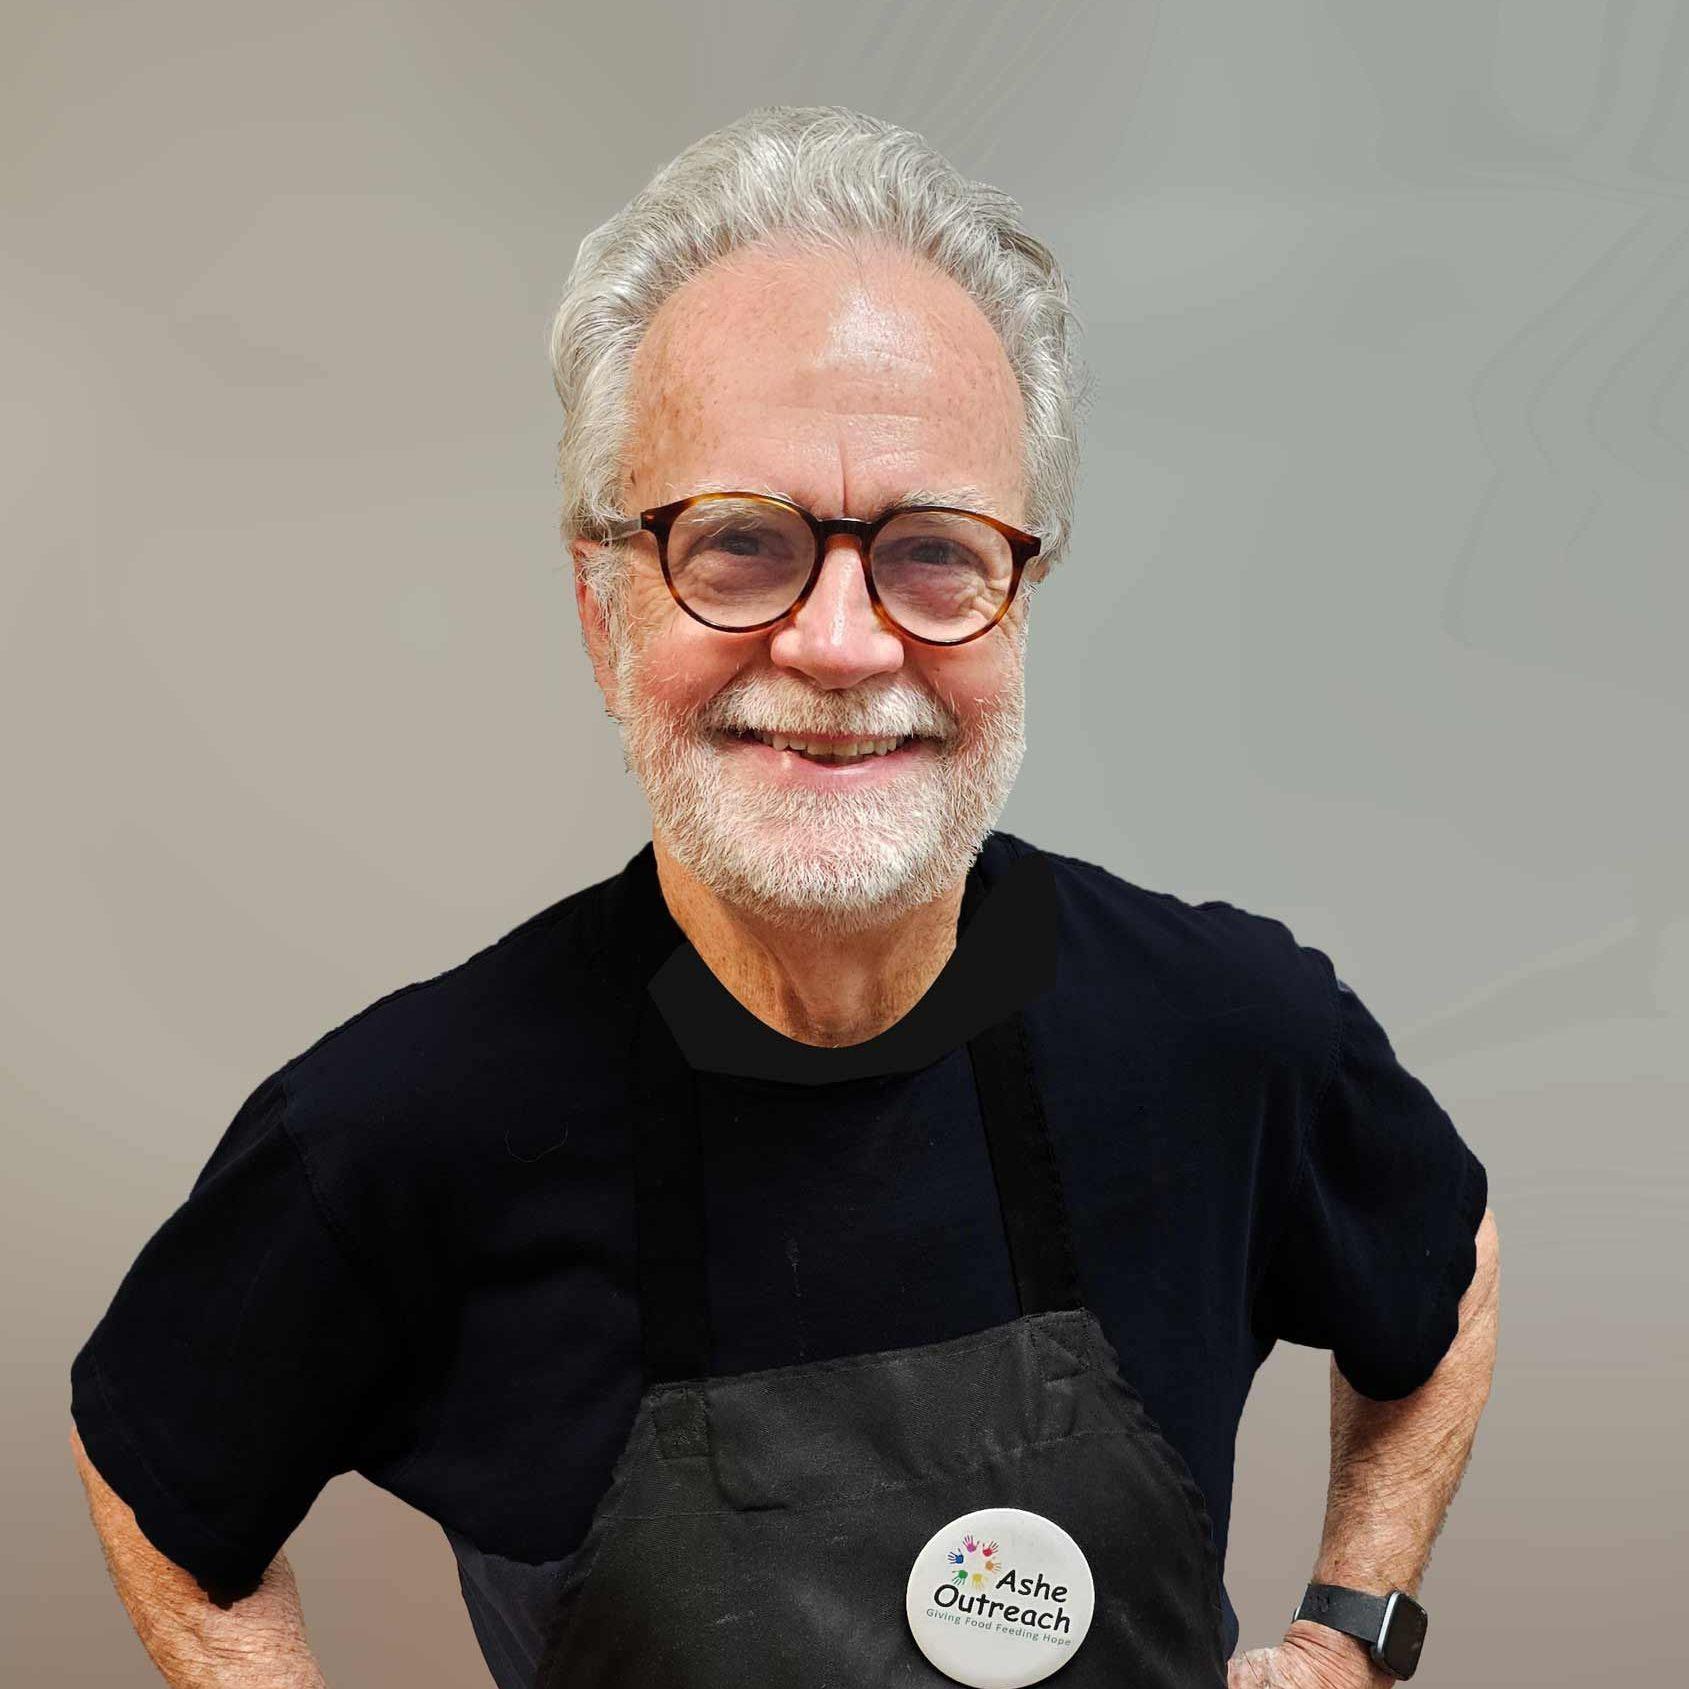 A man wearing glasses and an apron is smiling for the camera.